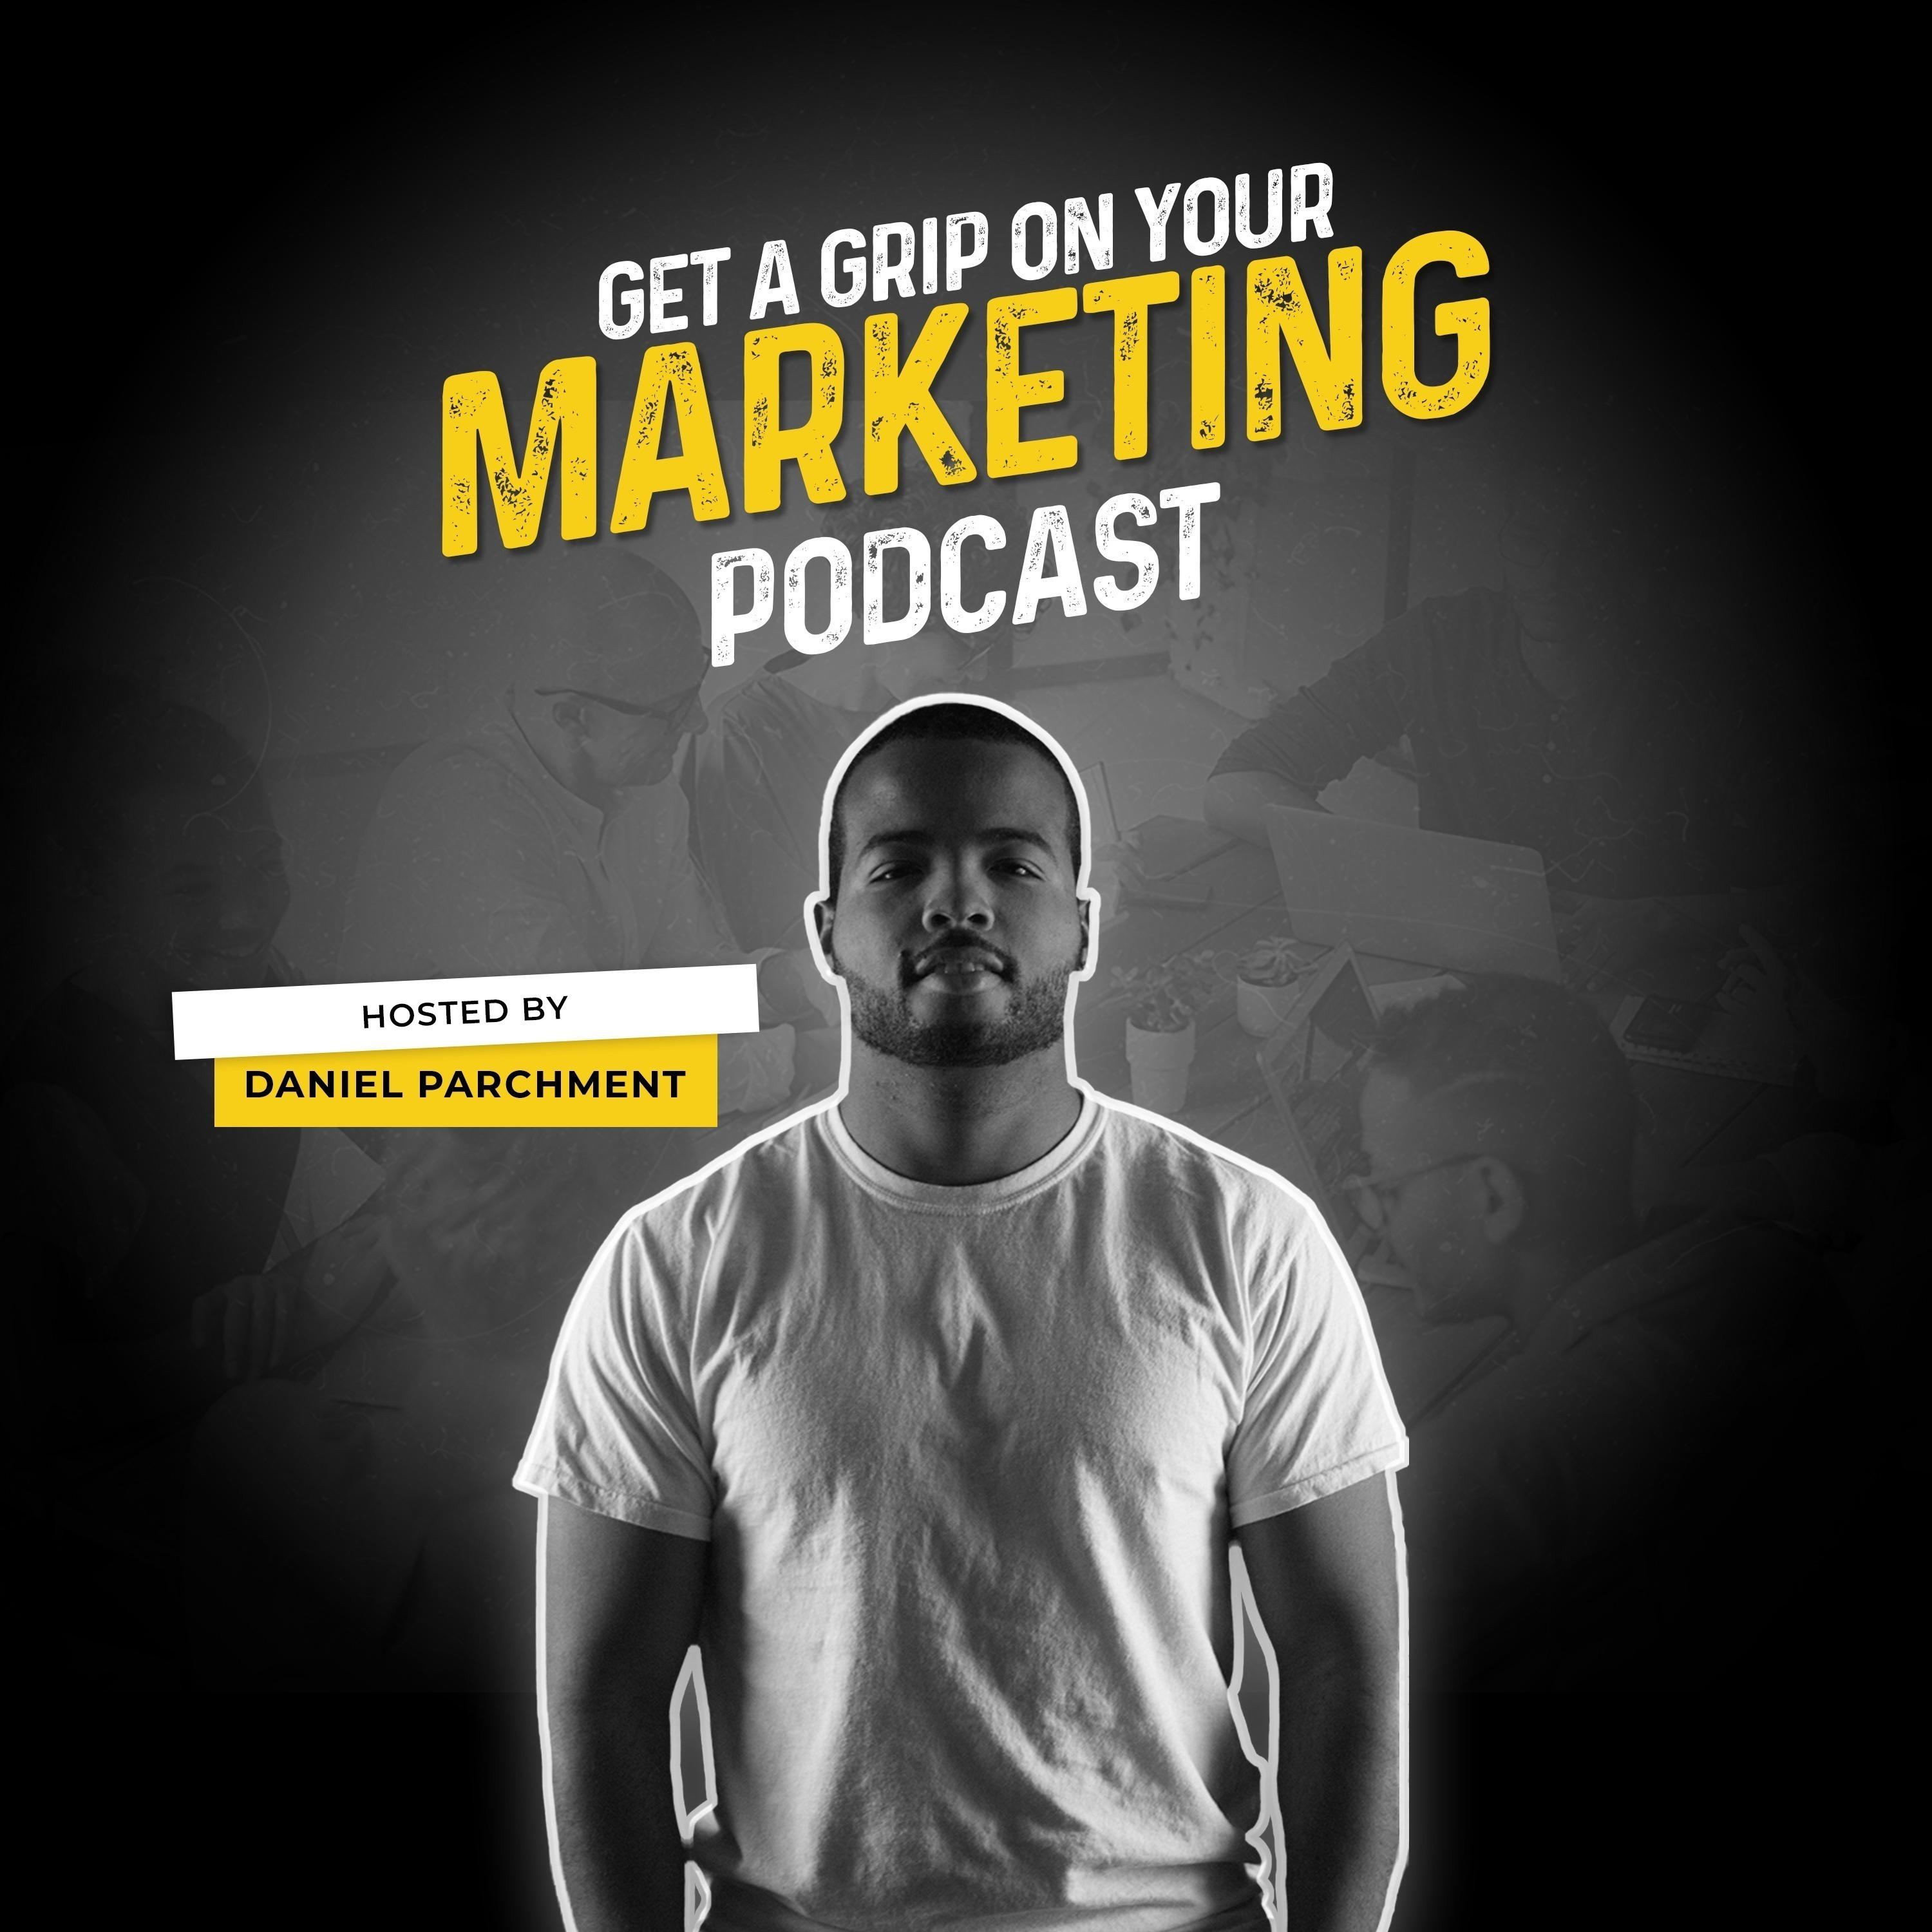 Get A Grip On Your Marketing Podcast